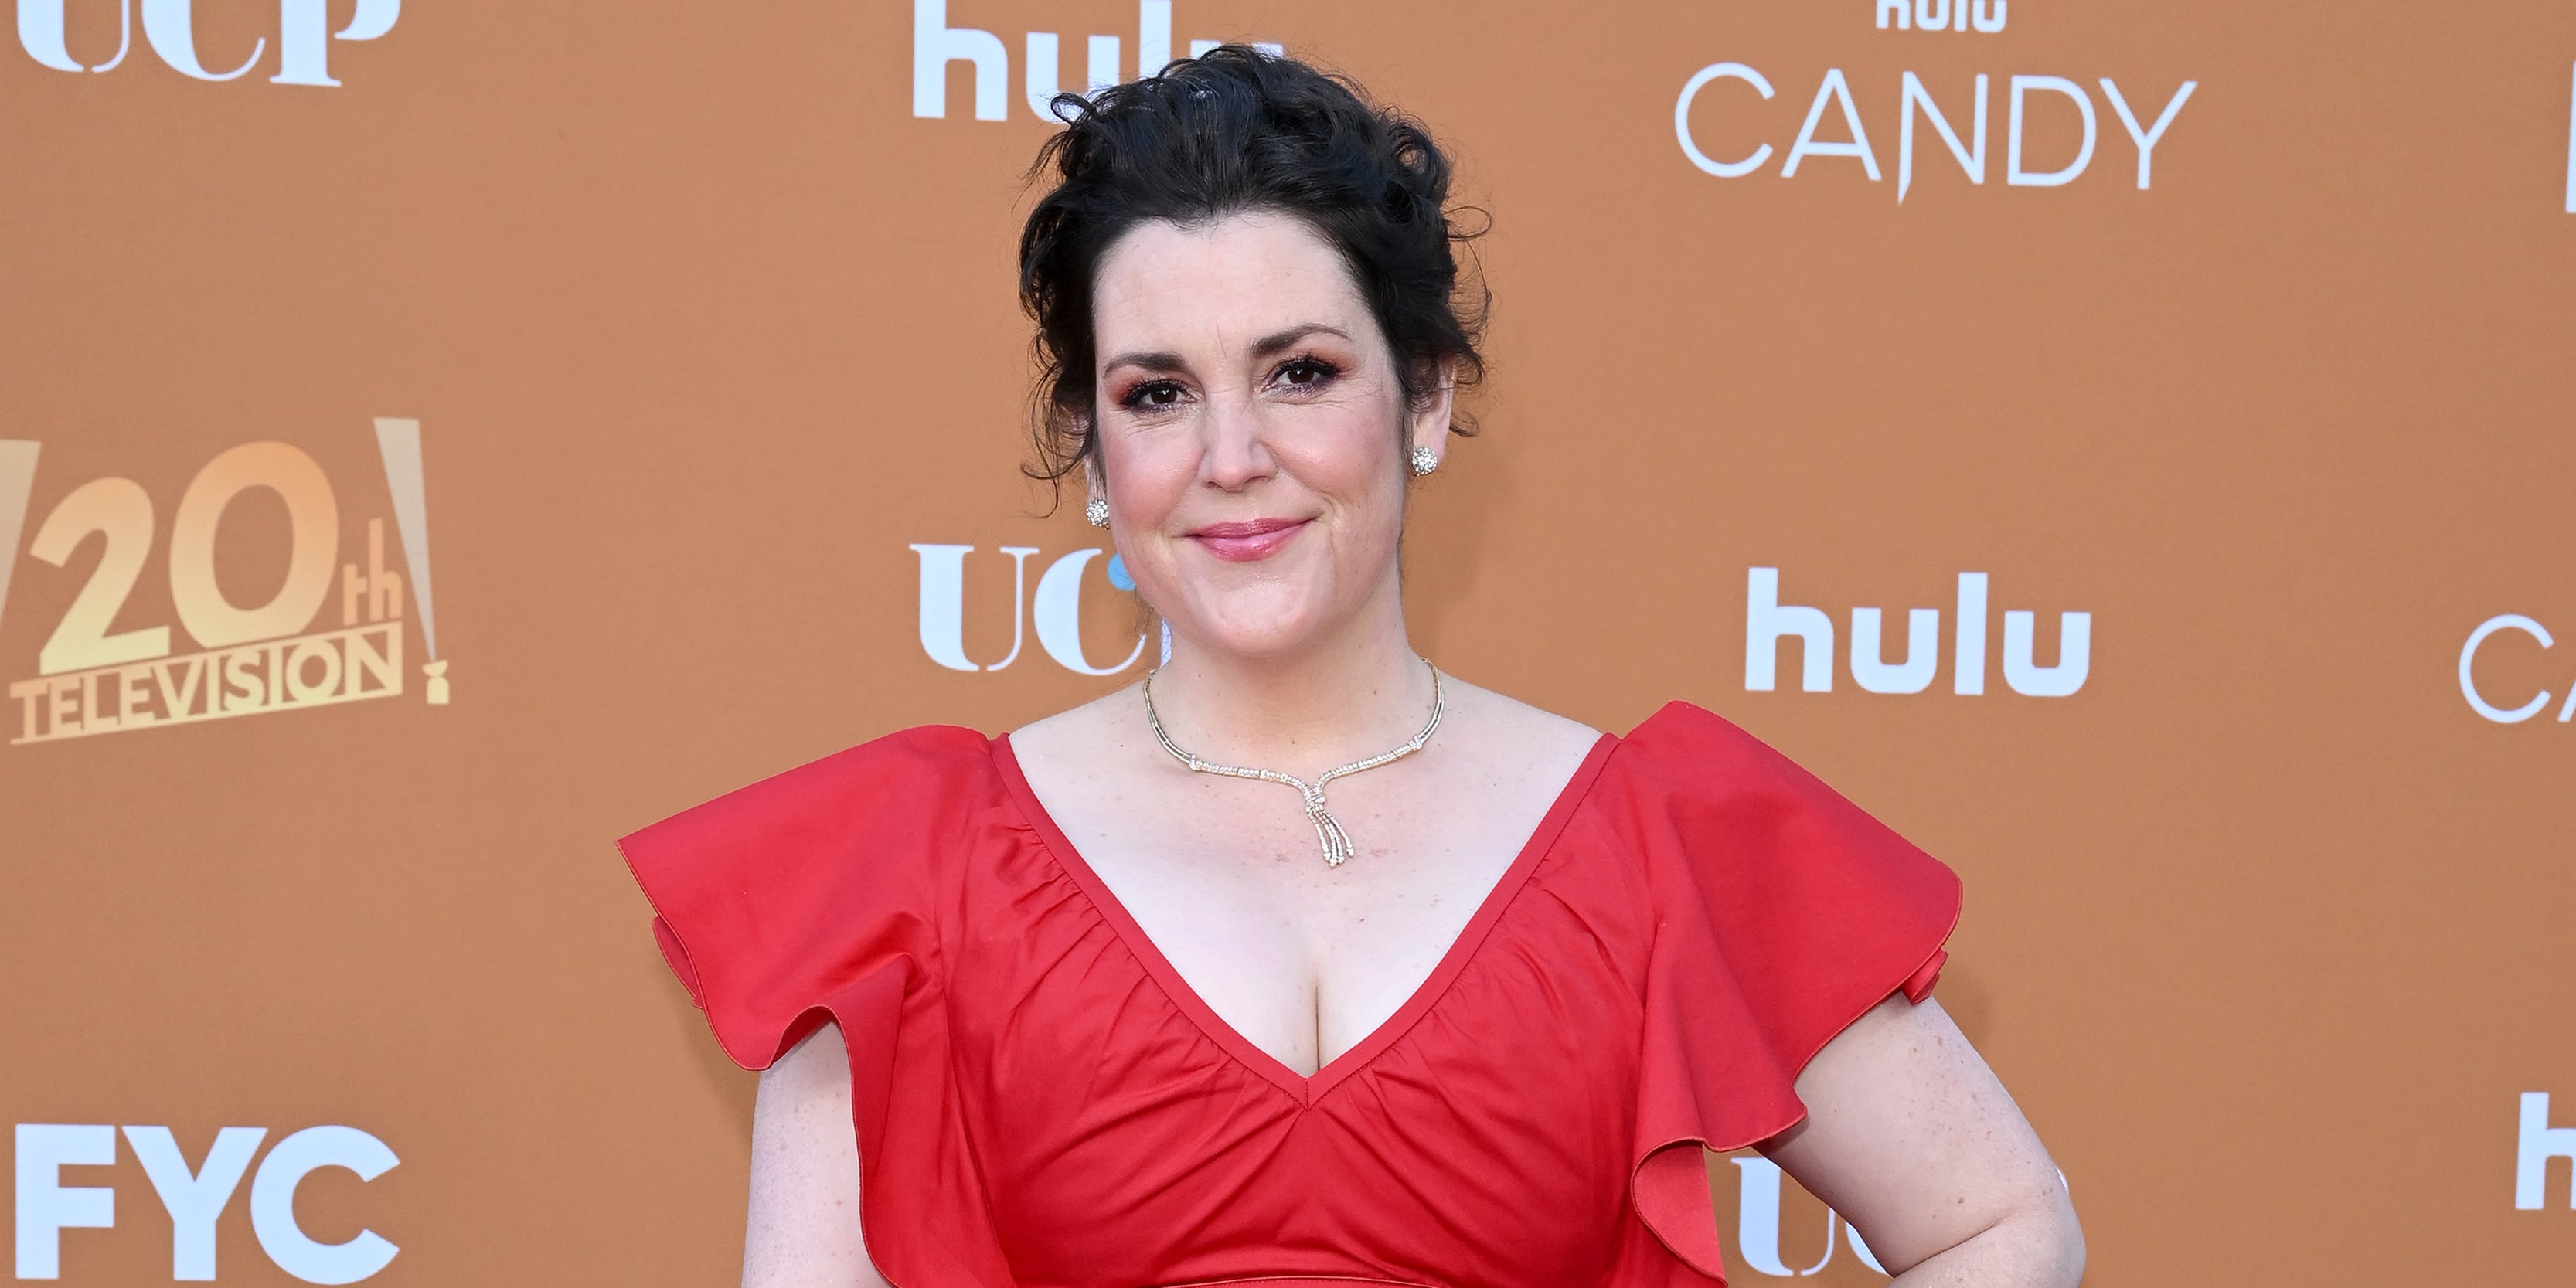 The Moment Melanie Lynskey Began Eating-Disorder Recovery